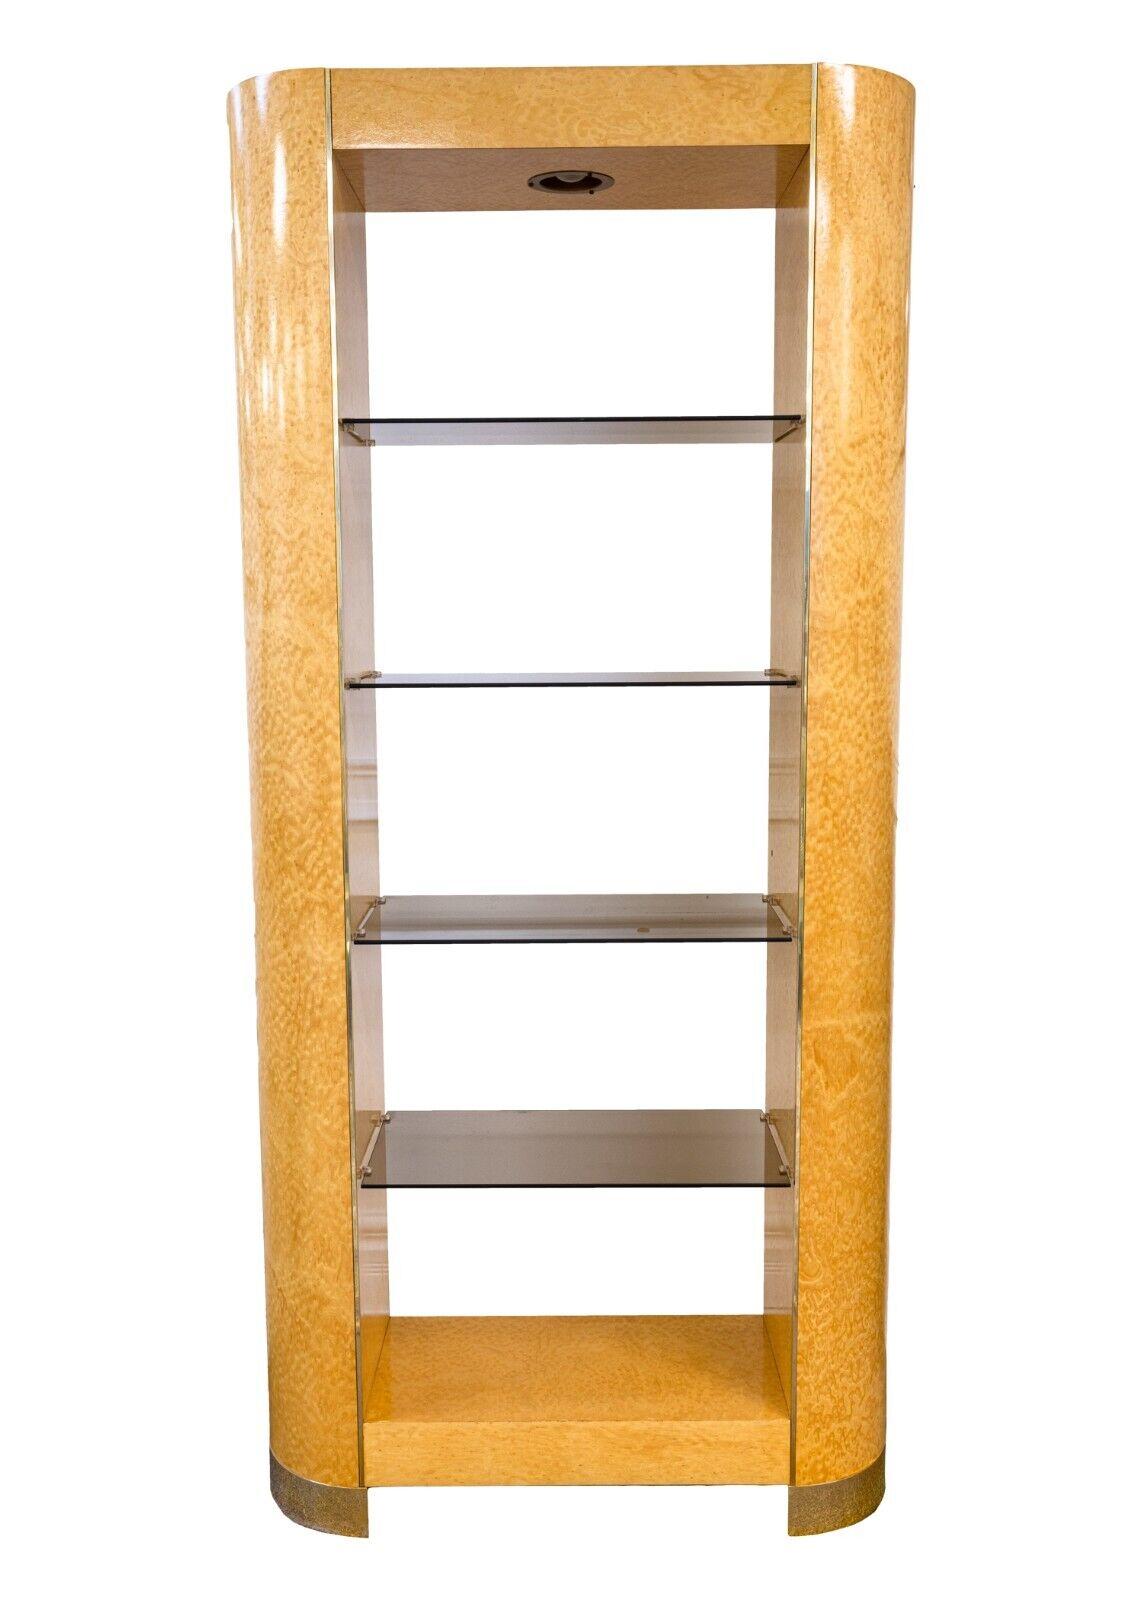 A birdseye maple etagere with smoked glass. This wonderful piece of furniture is a great showcase piece. This etagere features a beautiful birdseye maple construction with brass detailing on the sides and the legs, and super sleek, clean smoked